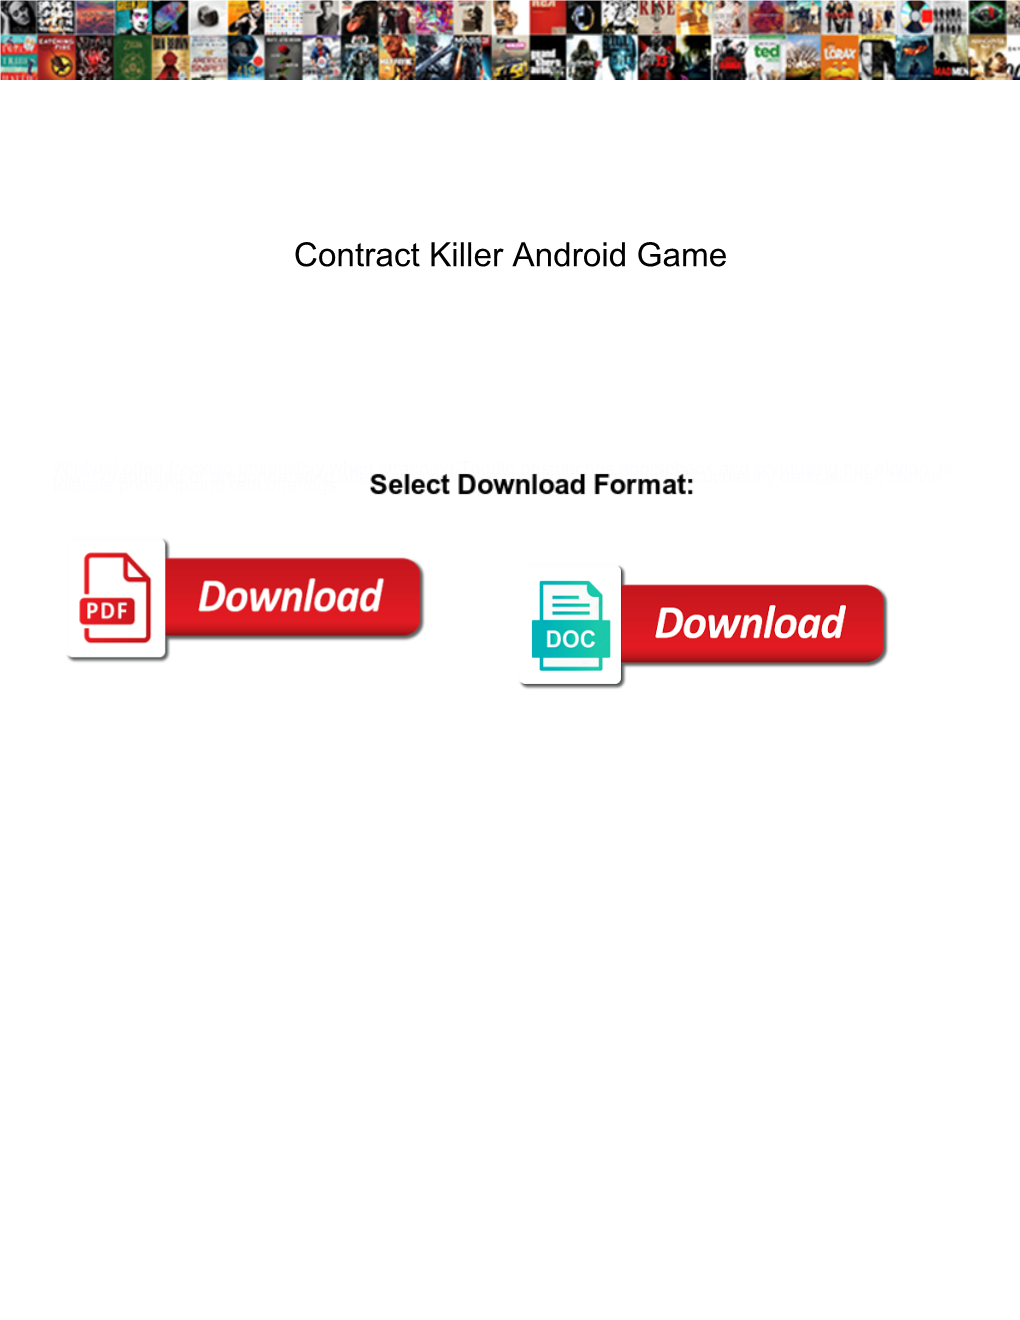 Contract Killer Android Game